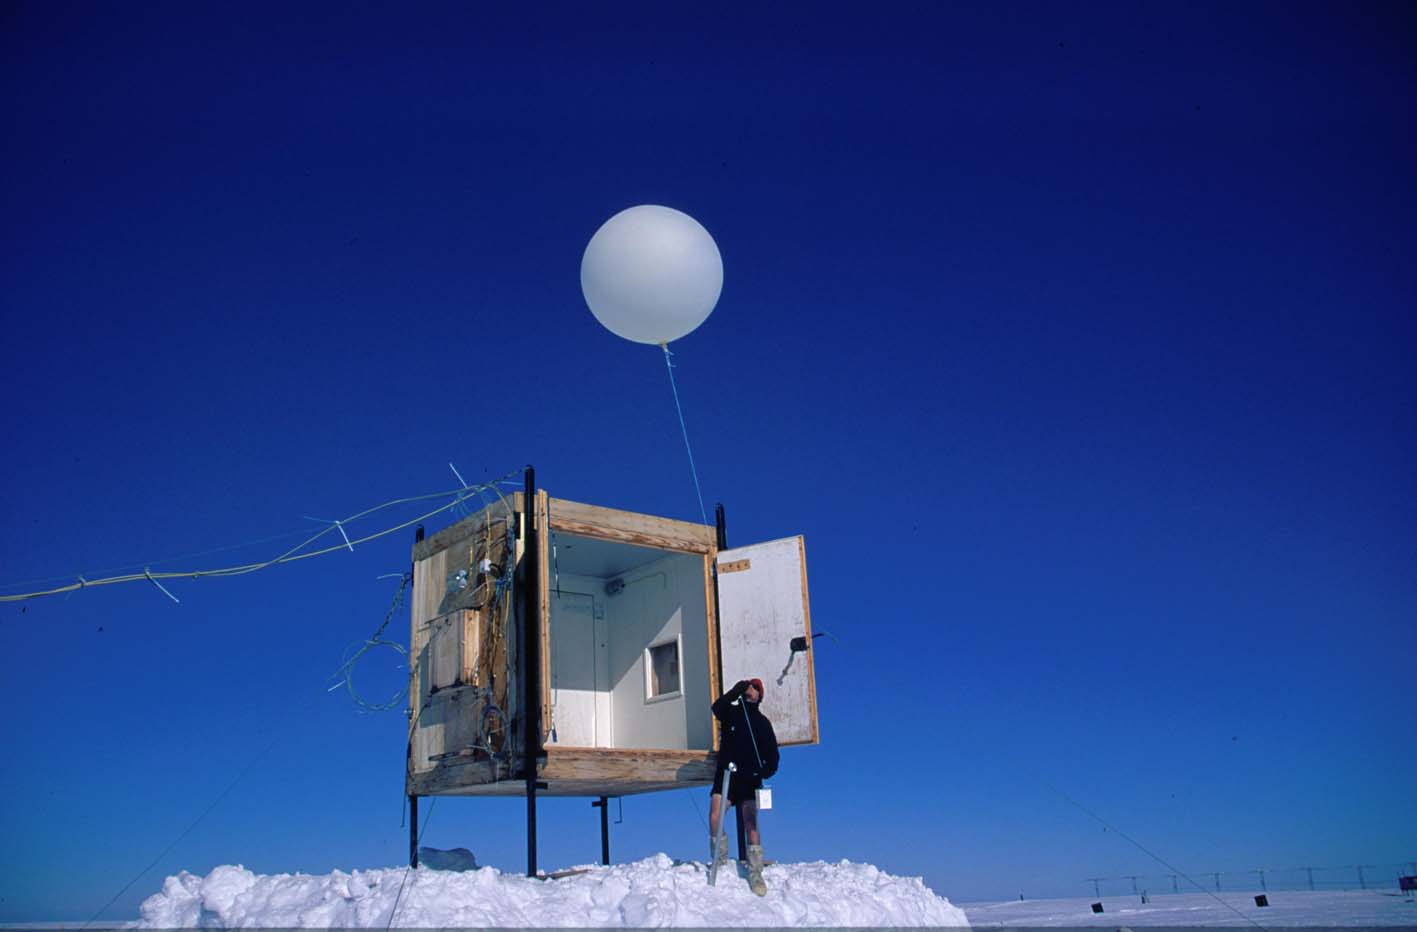 The Halley Met balloon shed with a baloon being launched